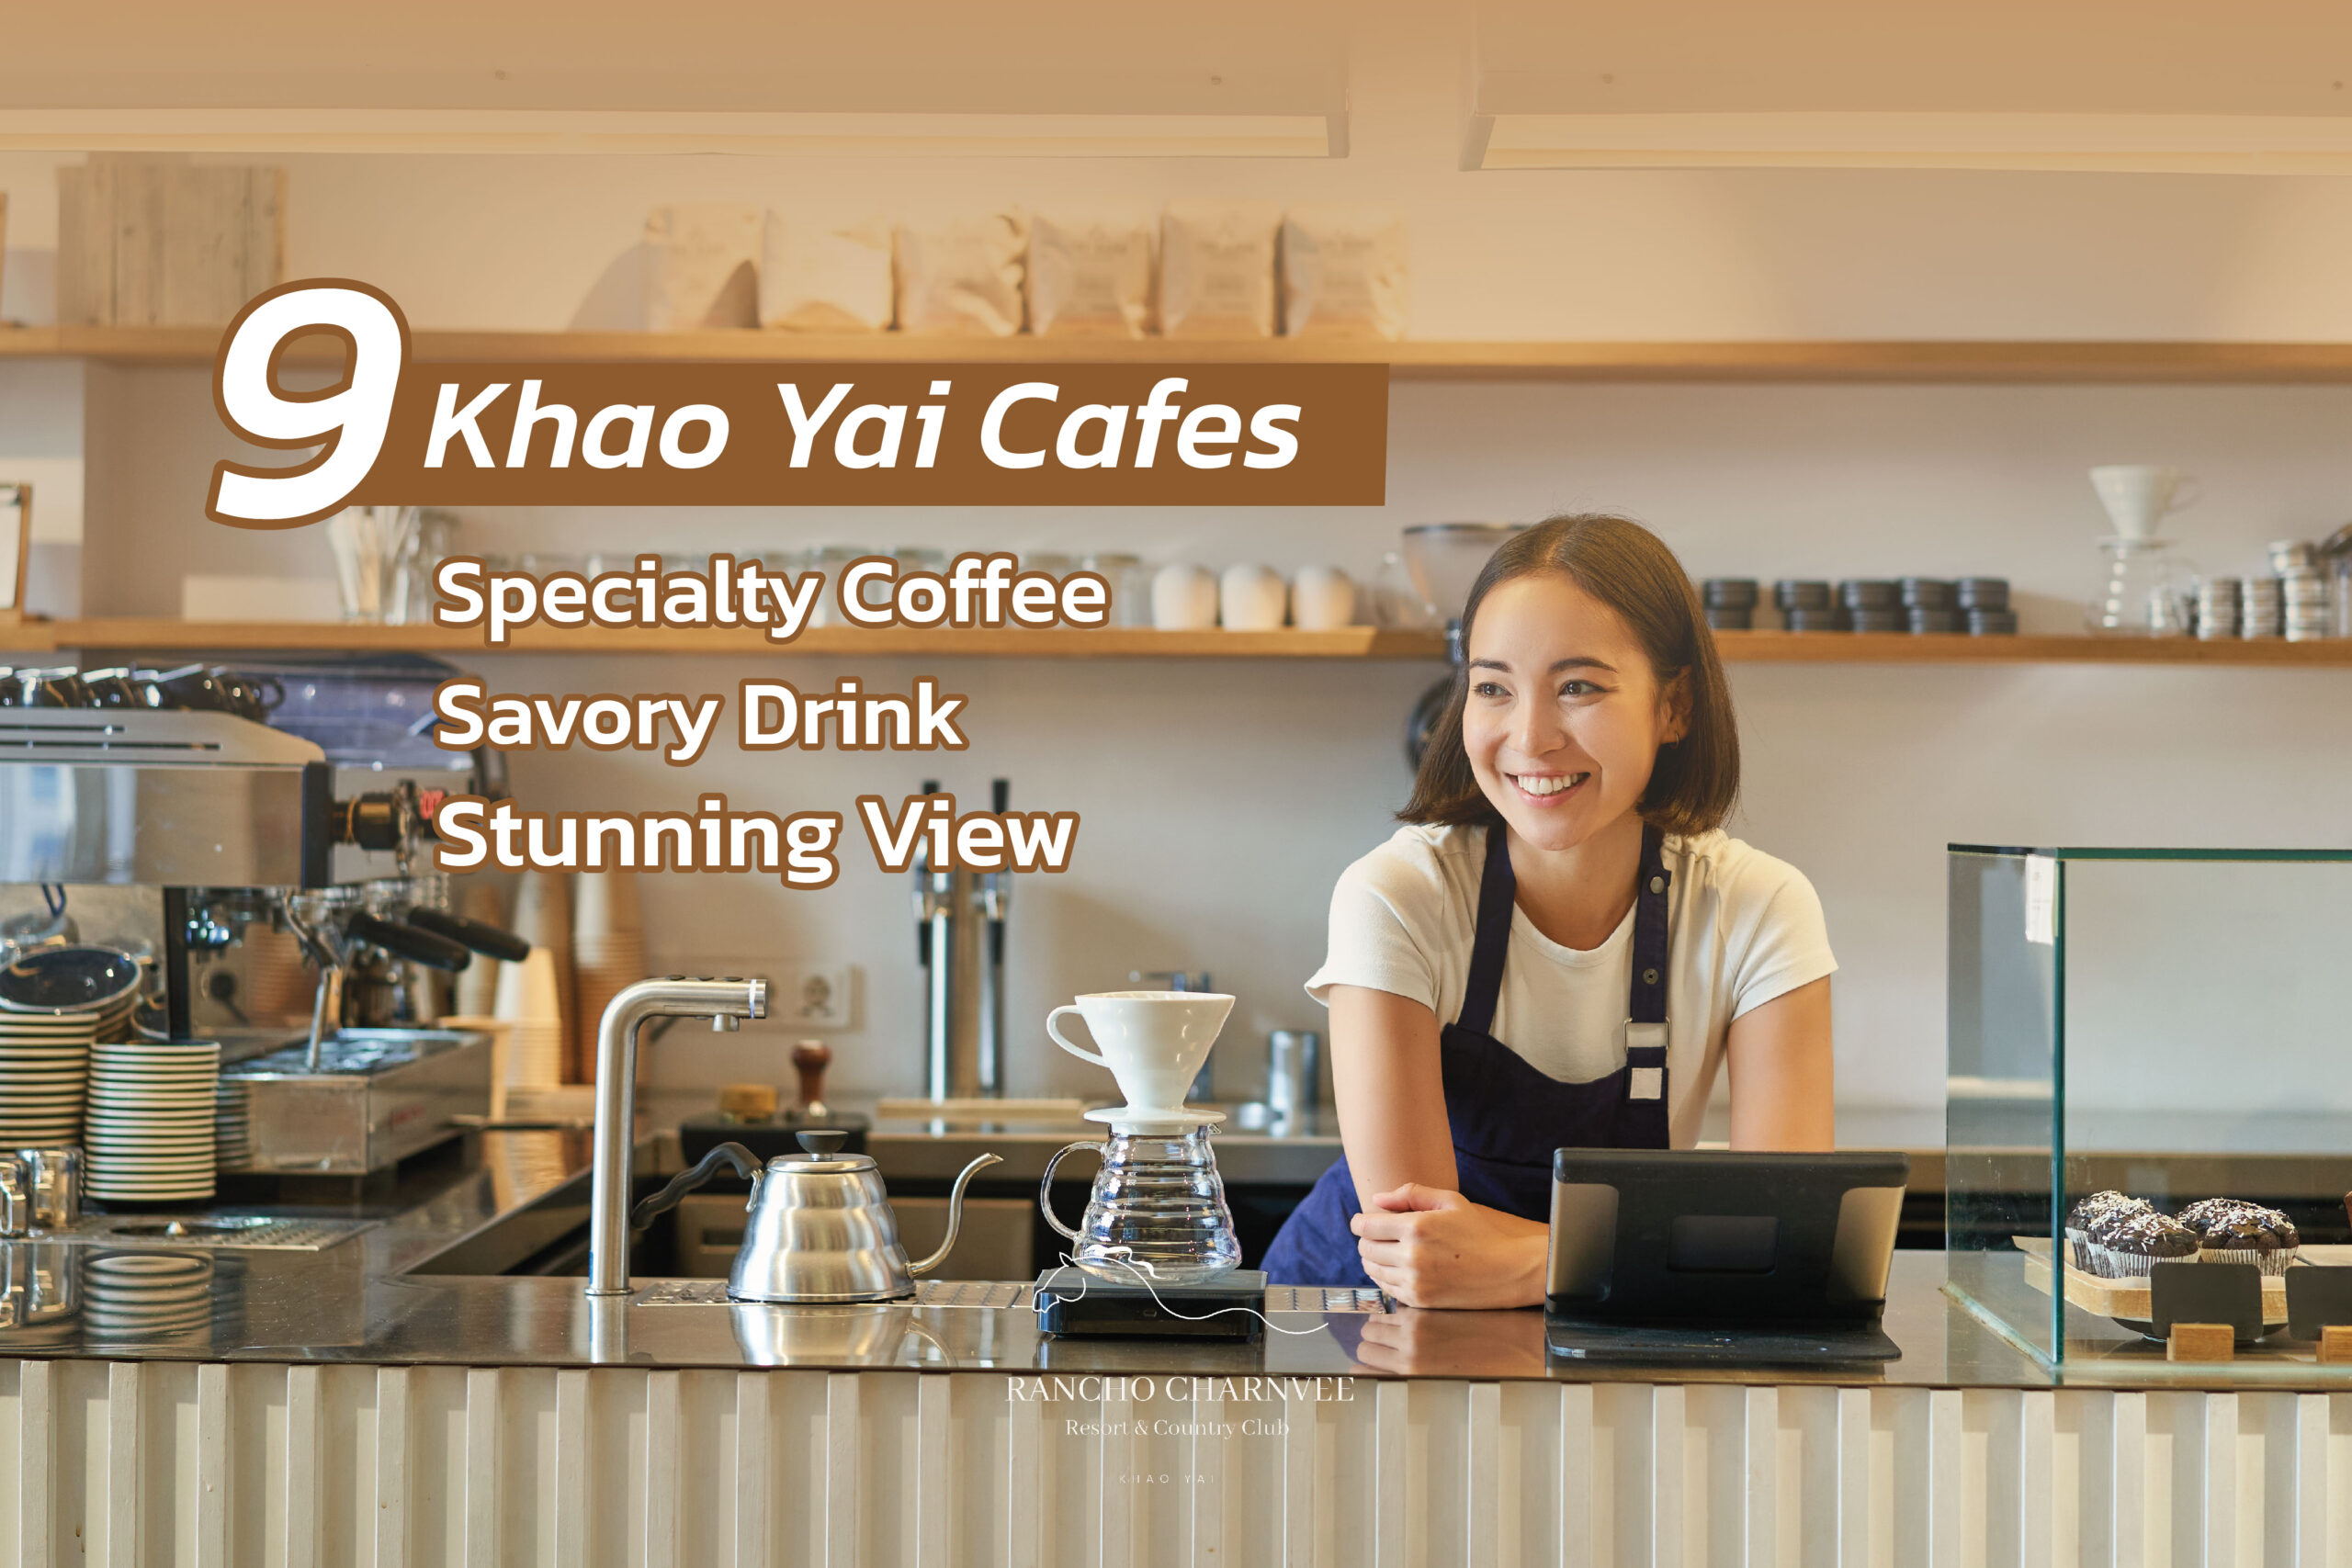 9 Khao Yai Cafes: Specialty Coffee, Savory Drink, Stunning View